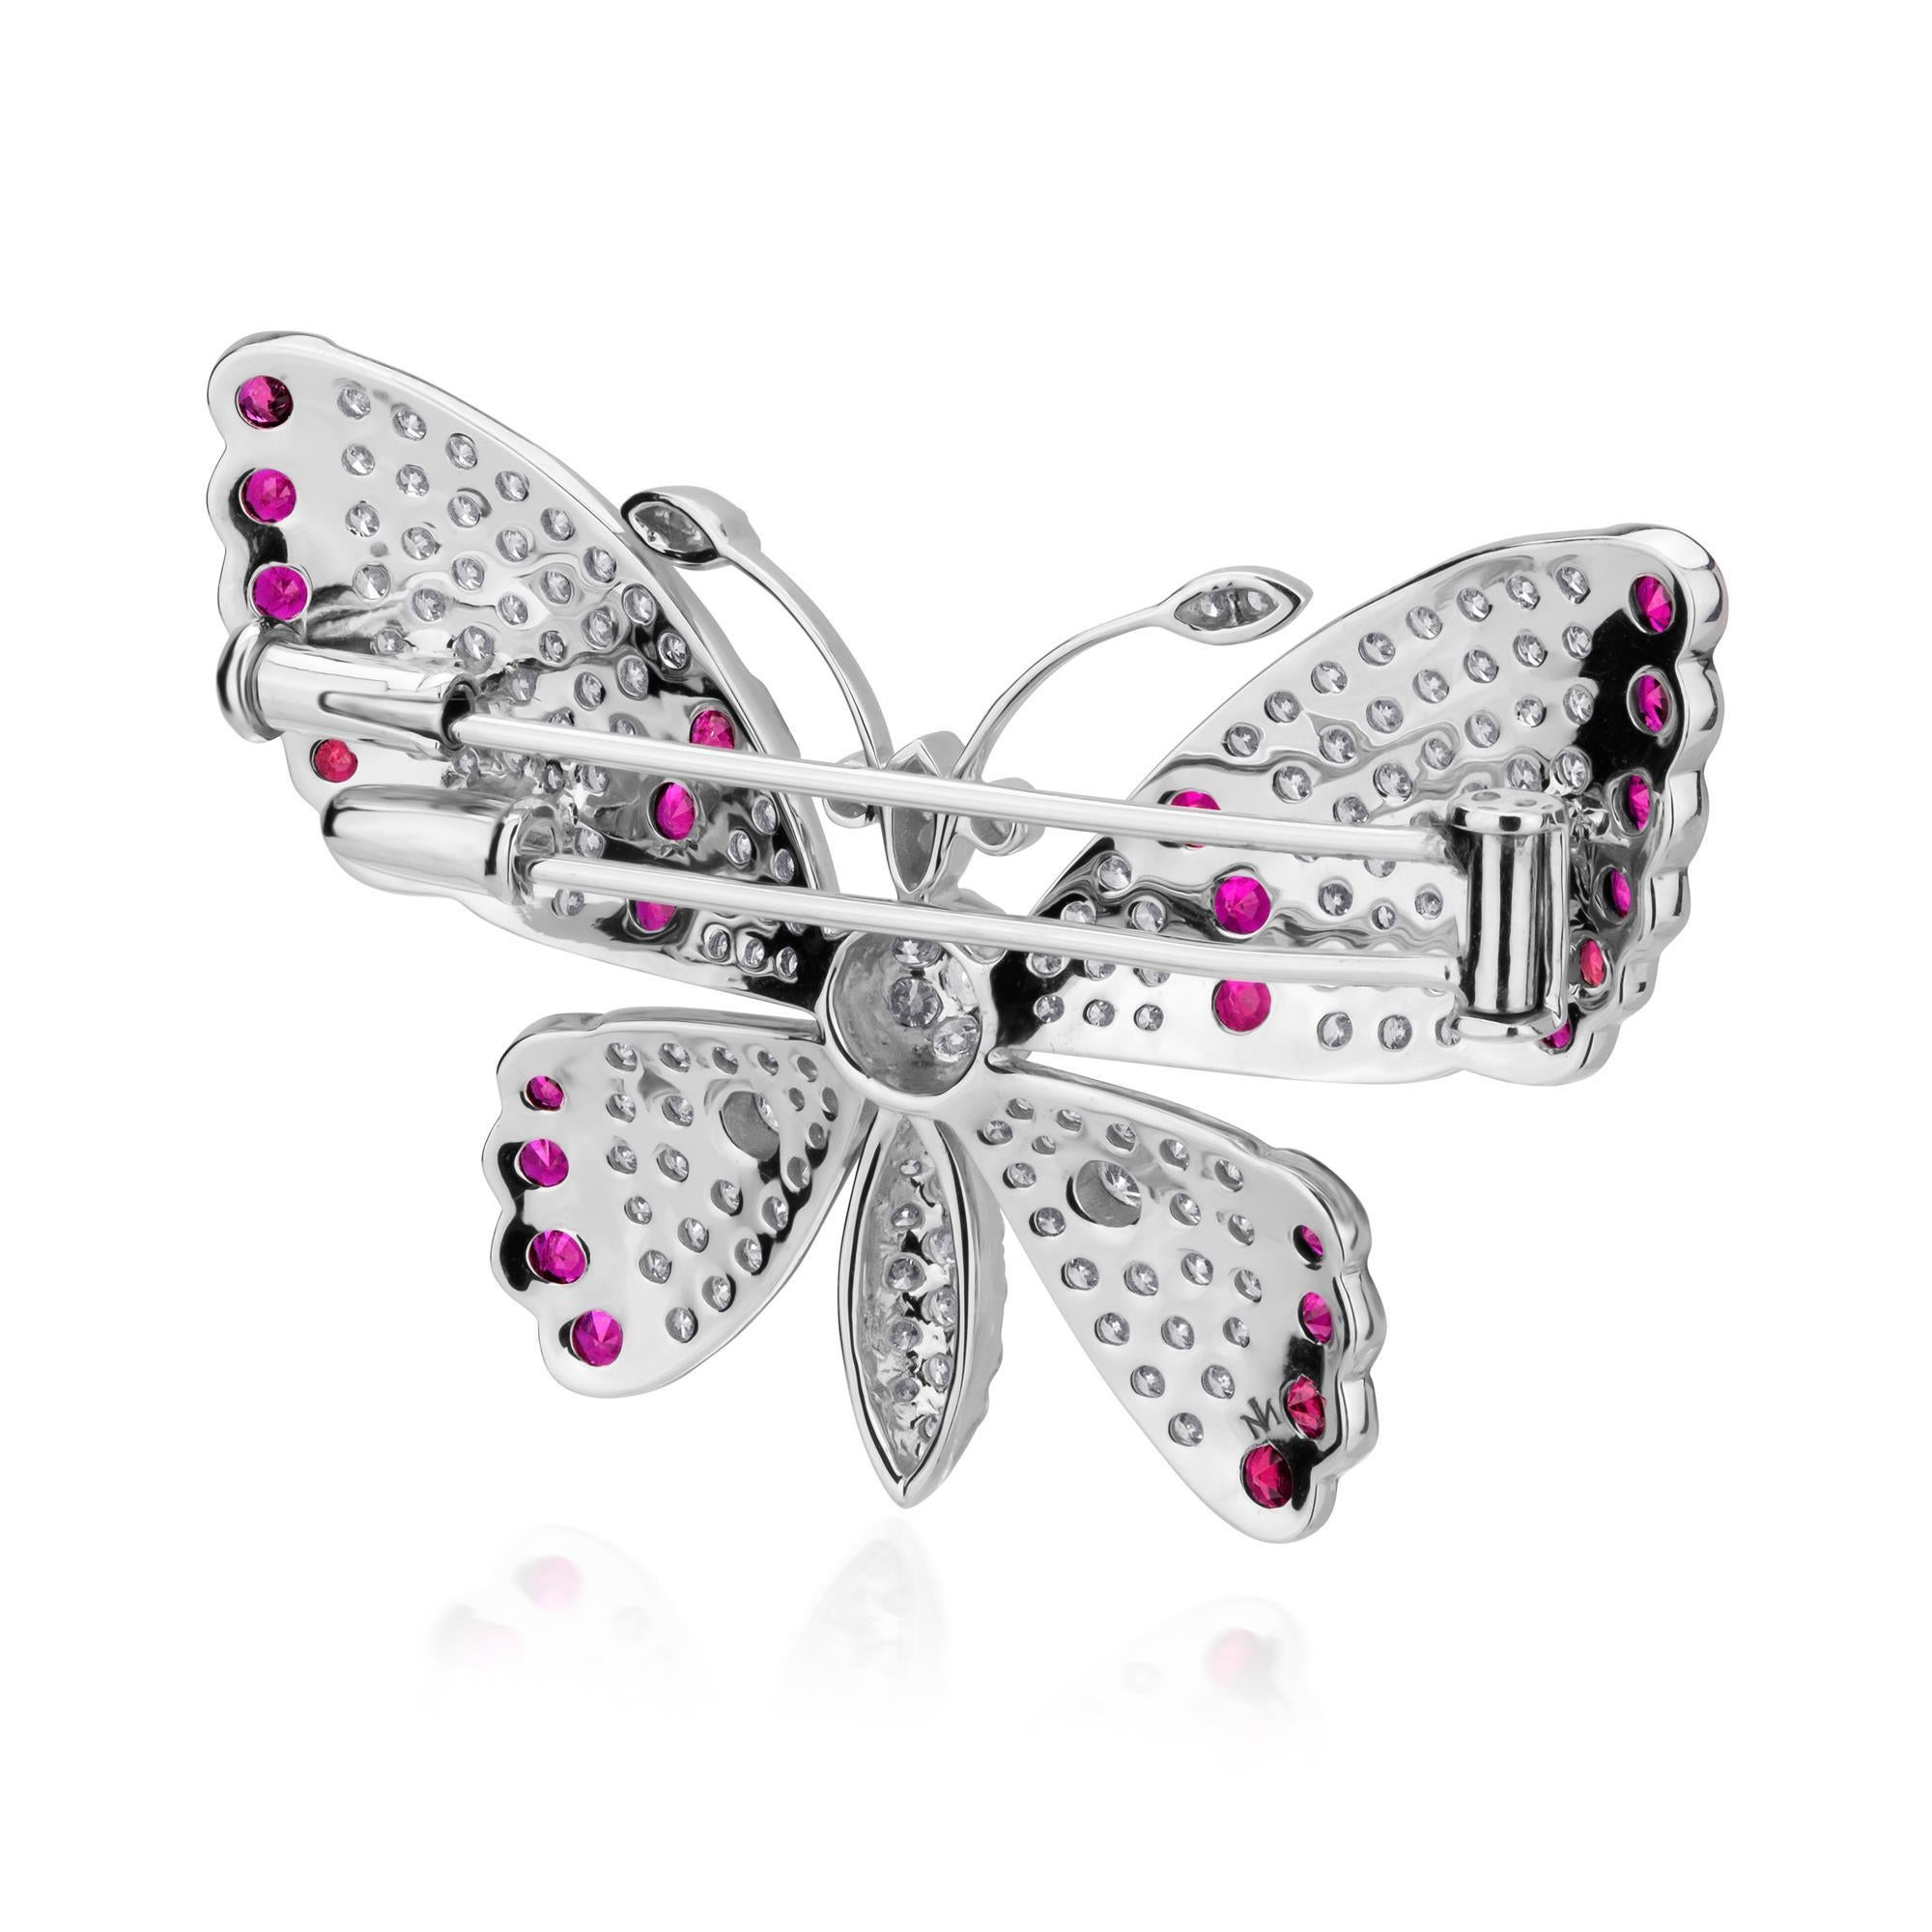 Contemporary 2.15 ct. t.w. Diamond and 1.45 ct. t.w. Ruby Butterfly Brooch in 18k White Gold